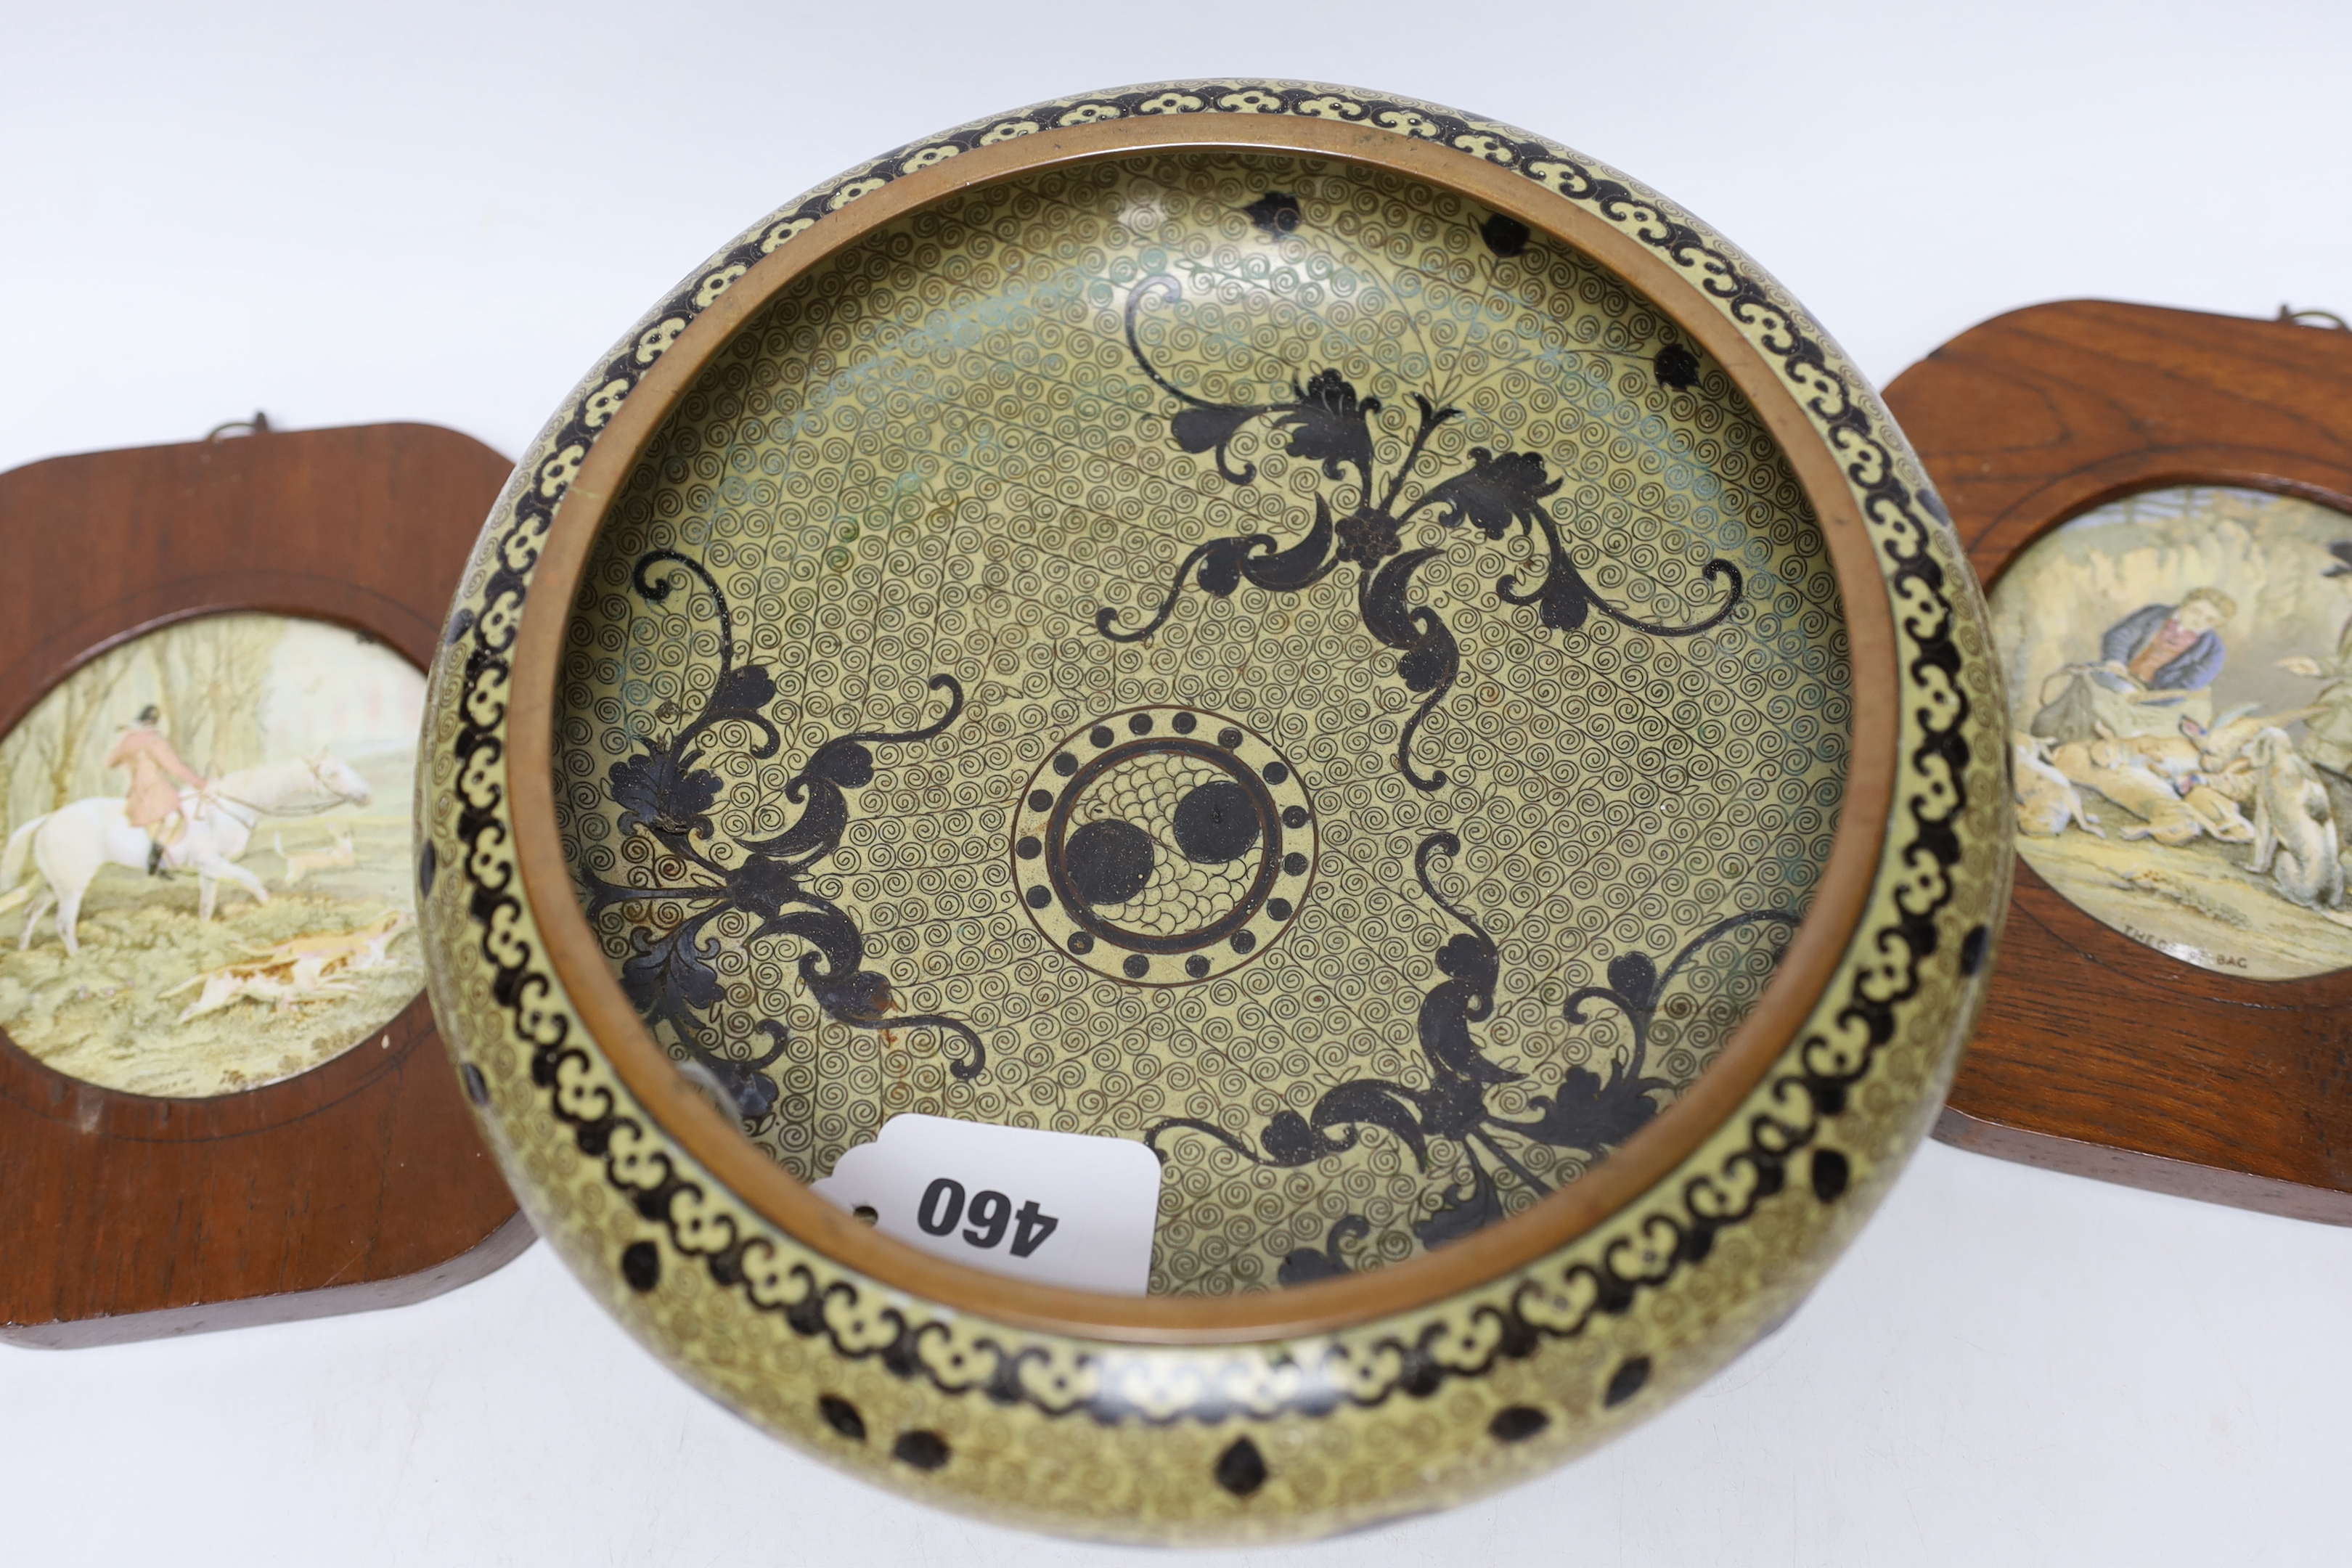 A Chinese cloisonné enamel bowl on a wooden stand, a pair of cloisonné jars with covers, and four 19th century Prattware pot lids, largest 25cm in diameter